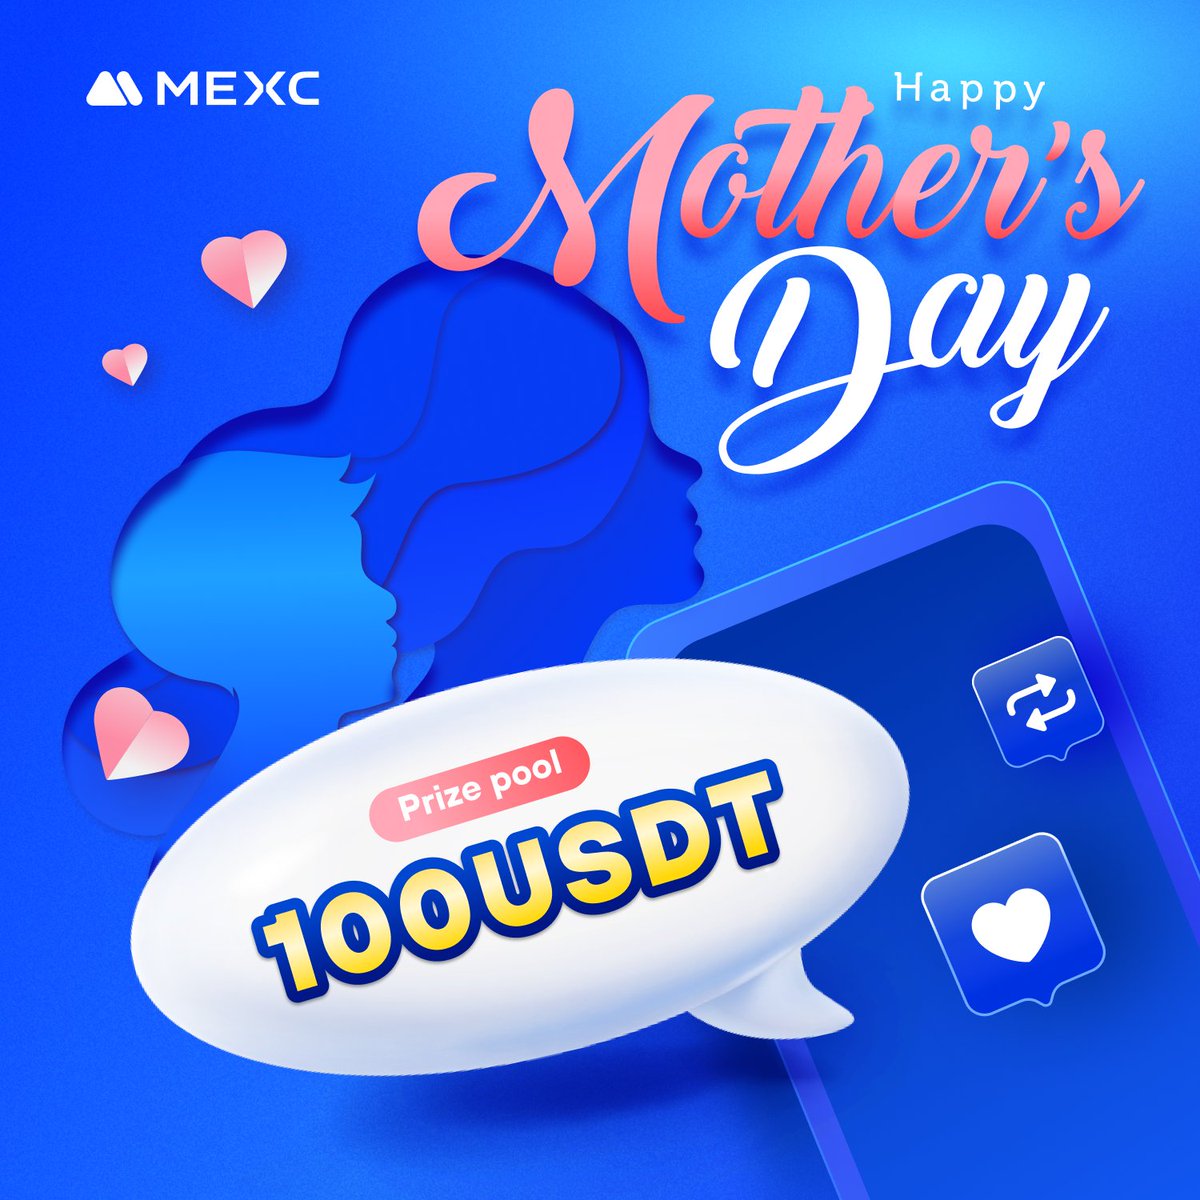 🌸 Celebrate Mother's Day with MEXC!

Join us in honoring the incredible moms out there by sharing your heartfelt Mother's Day wishes and how you're planning to celebrate! 💕

1️⃣Follow @MEXC_Official, 💖 and QT
2️⃣Sign Up & Details:
forms.gle/qMr123XTh1kY4F…